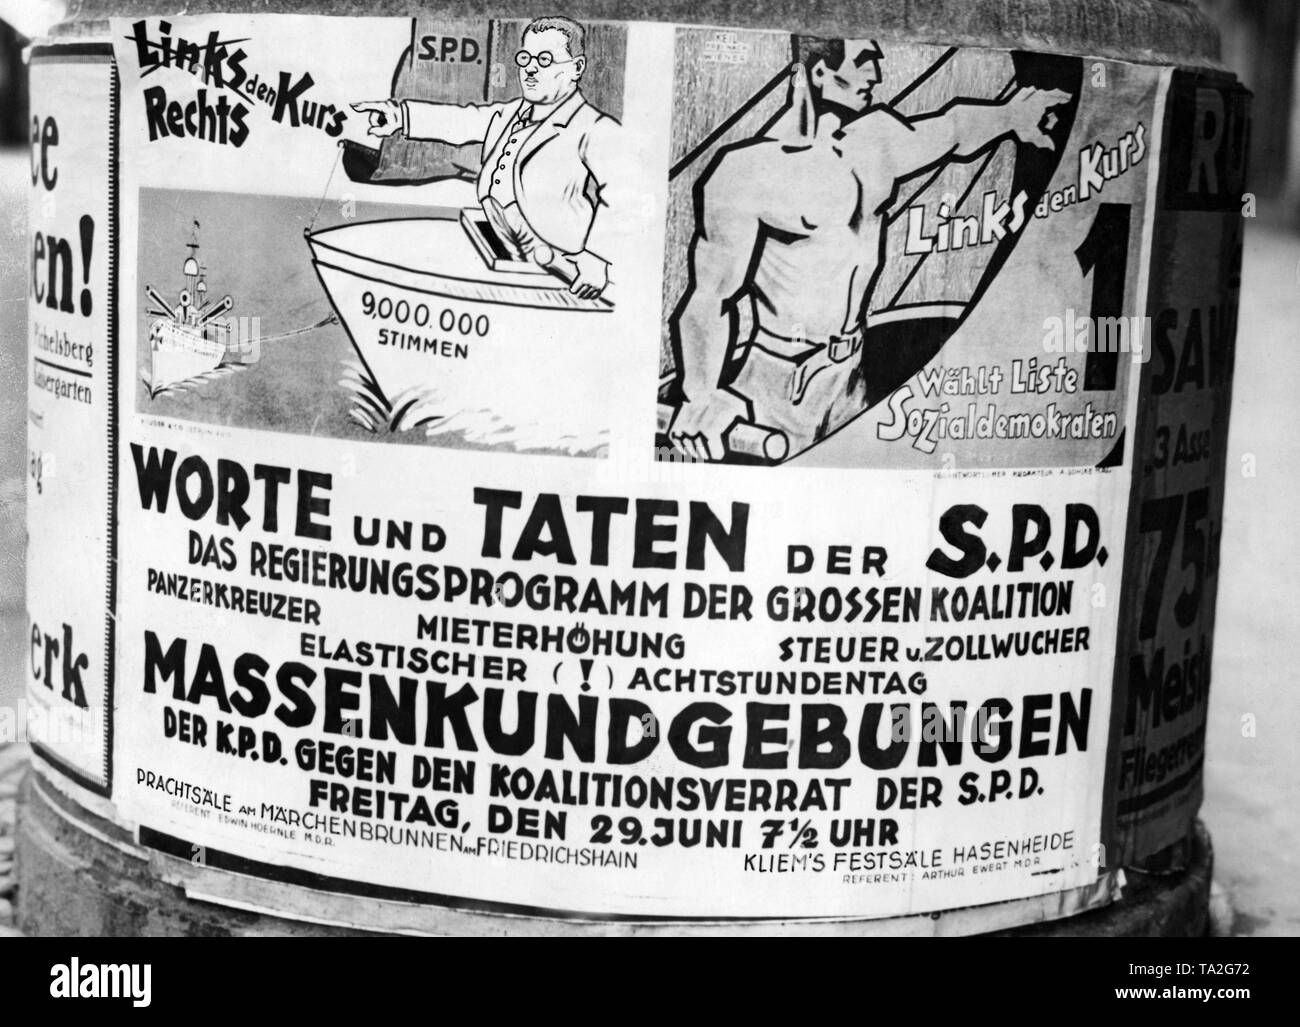 With this election poster the KPD advertises the mass demonstrations against the behavior of the SPD in the armored cruiser affair and accuses them on changing policy and coalition treason. The armored cruiser program of the Kriegsmarine, which envisaged the construction of three battleships, led to fierce attacks of the Communist Party against the SPD because they had led their Reichstag election campaign with the slogan 'No cruiser', but then, as Cabinet approved the construction. It was a political farce, which inflicted serious damage to the reputation of the SPD. Stock Photo